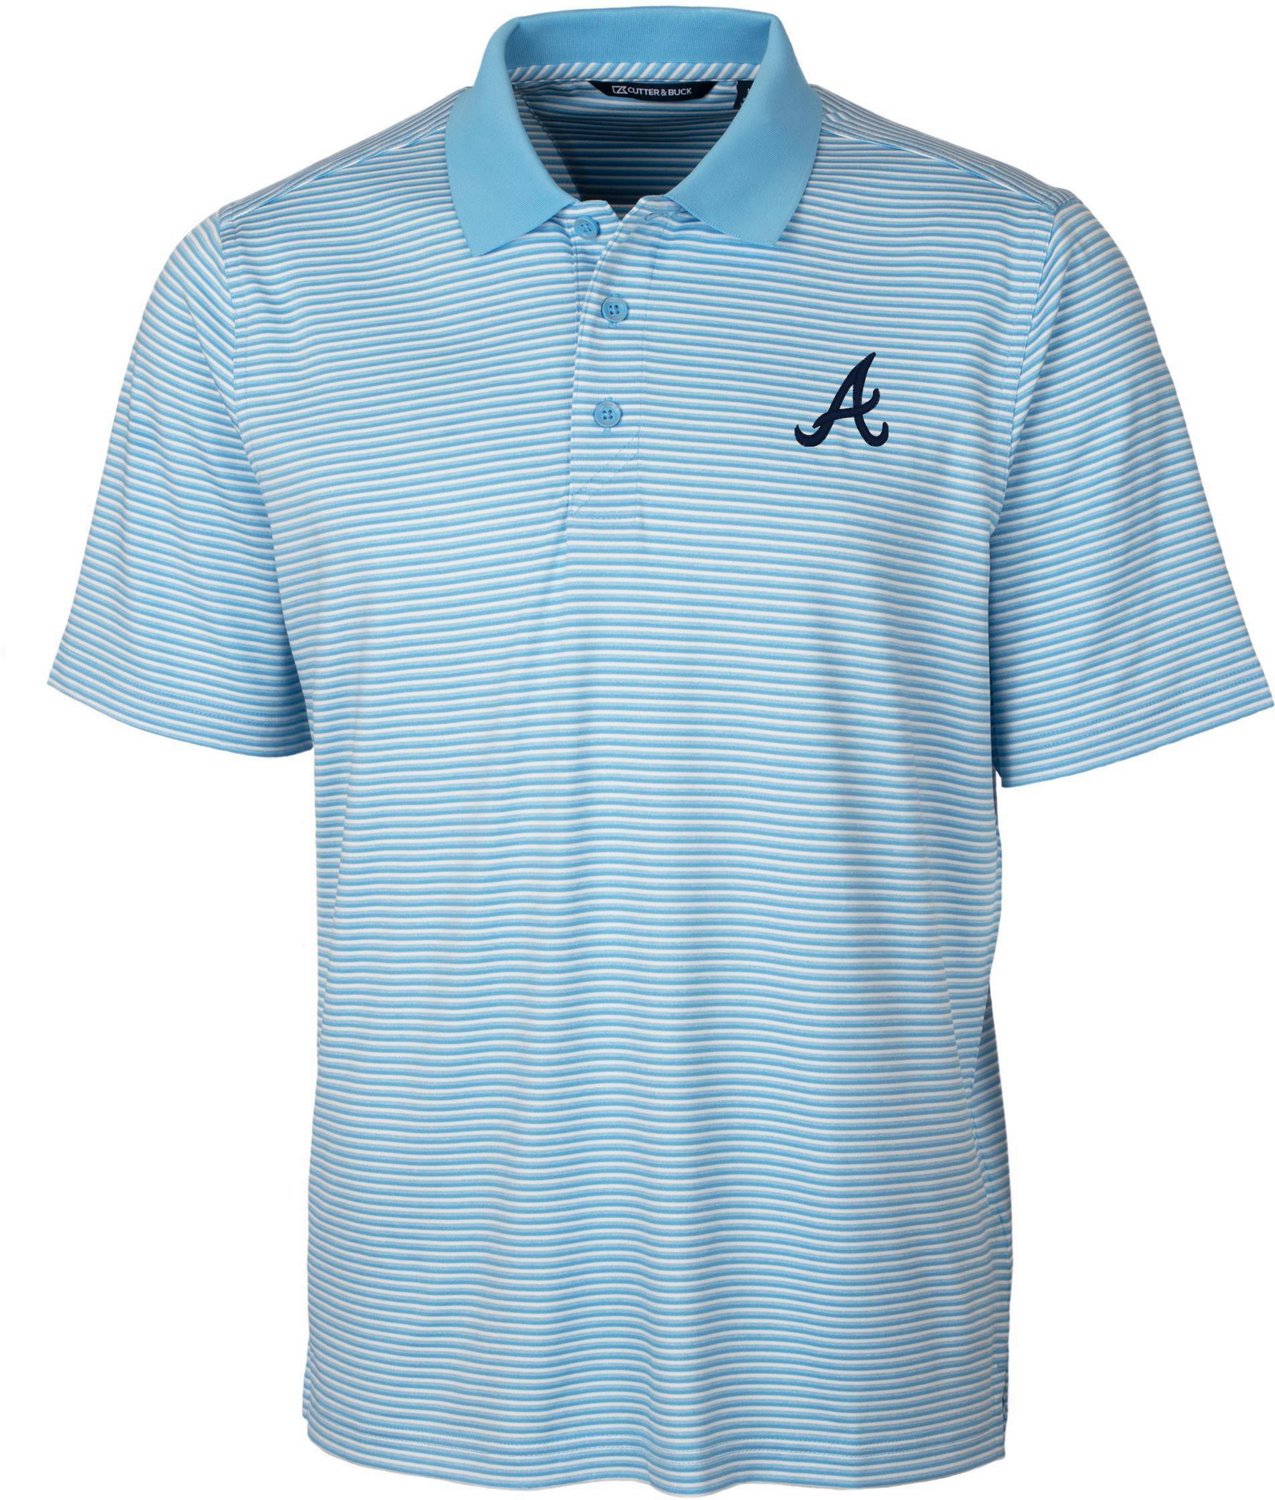 Atlanta Braves Cutter & Buck Forge Eco Double Stripe Stretch Recycled Polo  - Gray/White